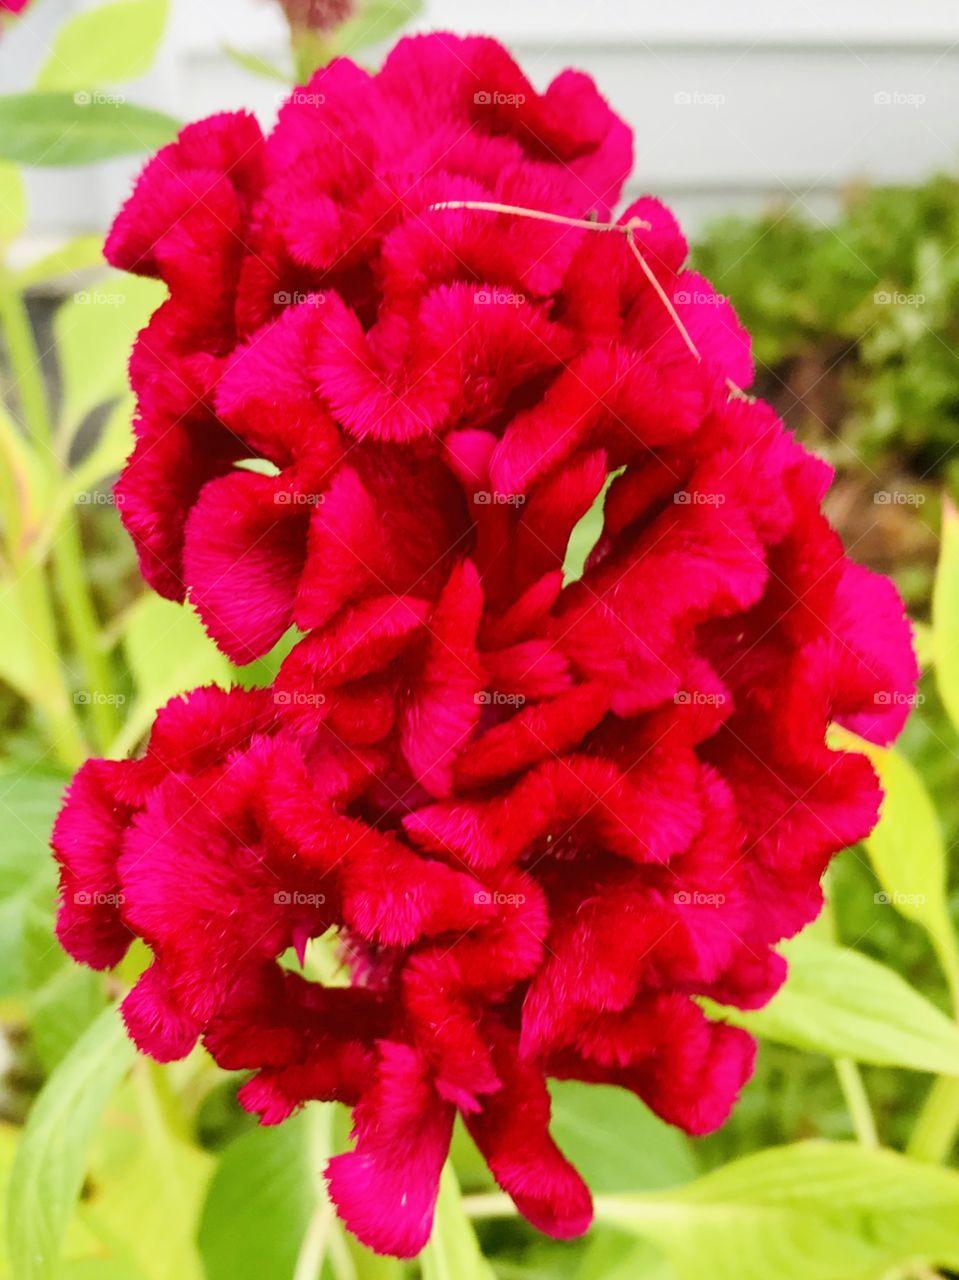 Spectacular Close-Up of Bright Pink Cockscomb Flower